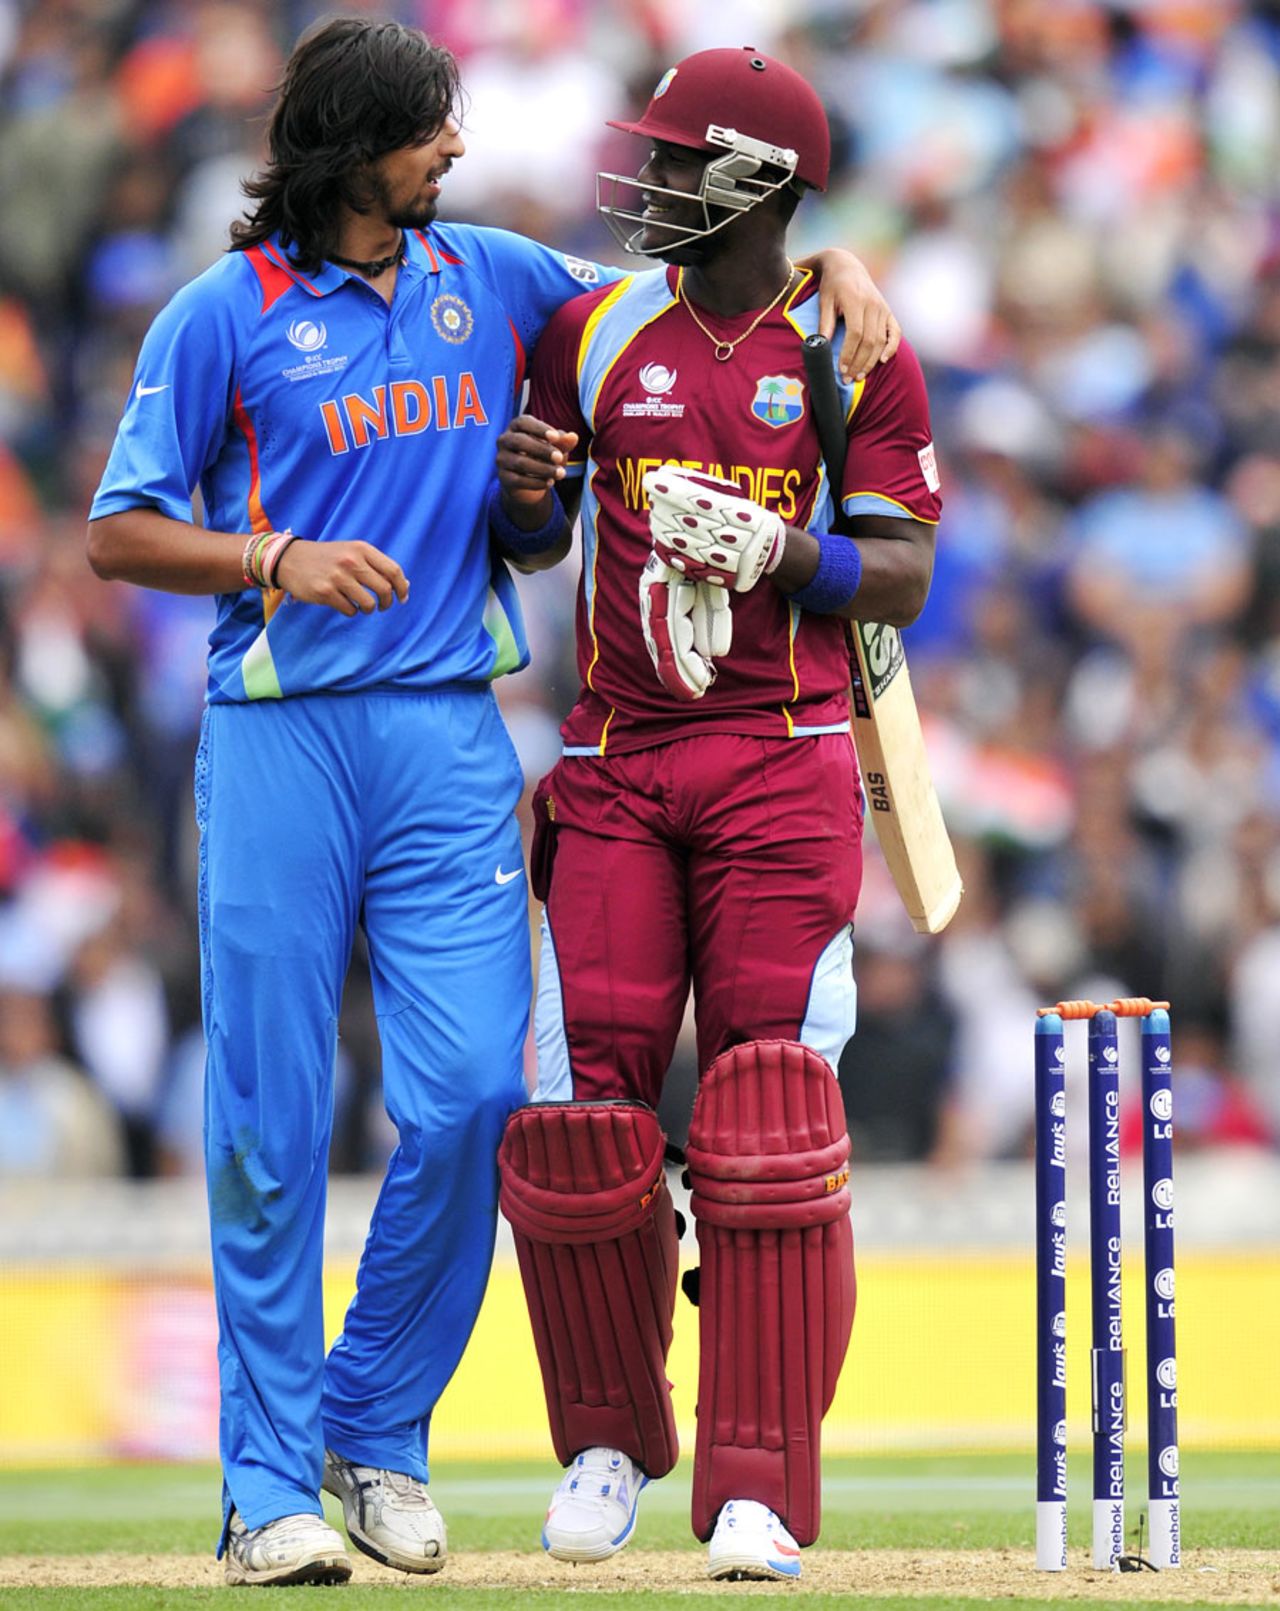 Darren Sammy and Ishant Sharma share a lighter moment, India v West Indies, Champions Trophy, Group B, The Oval, June 11, 2013